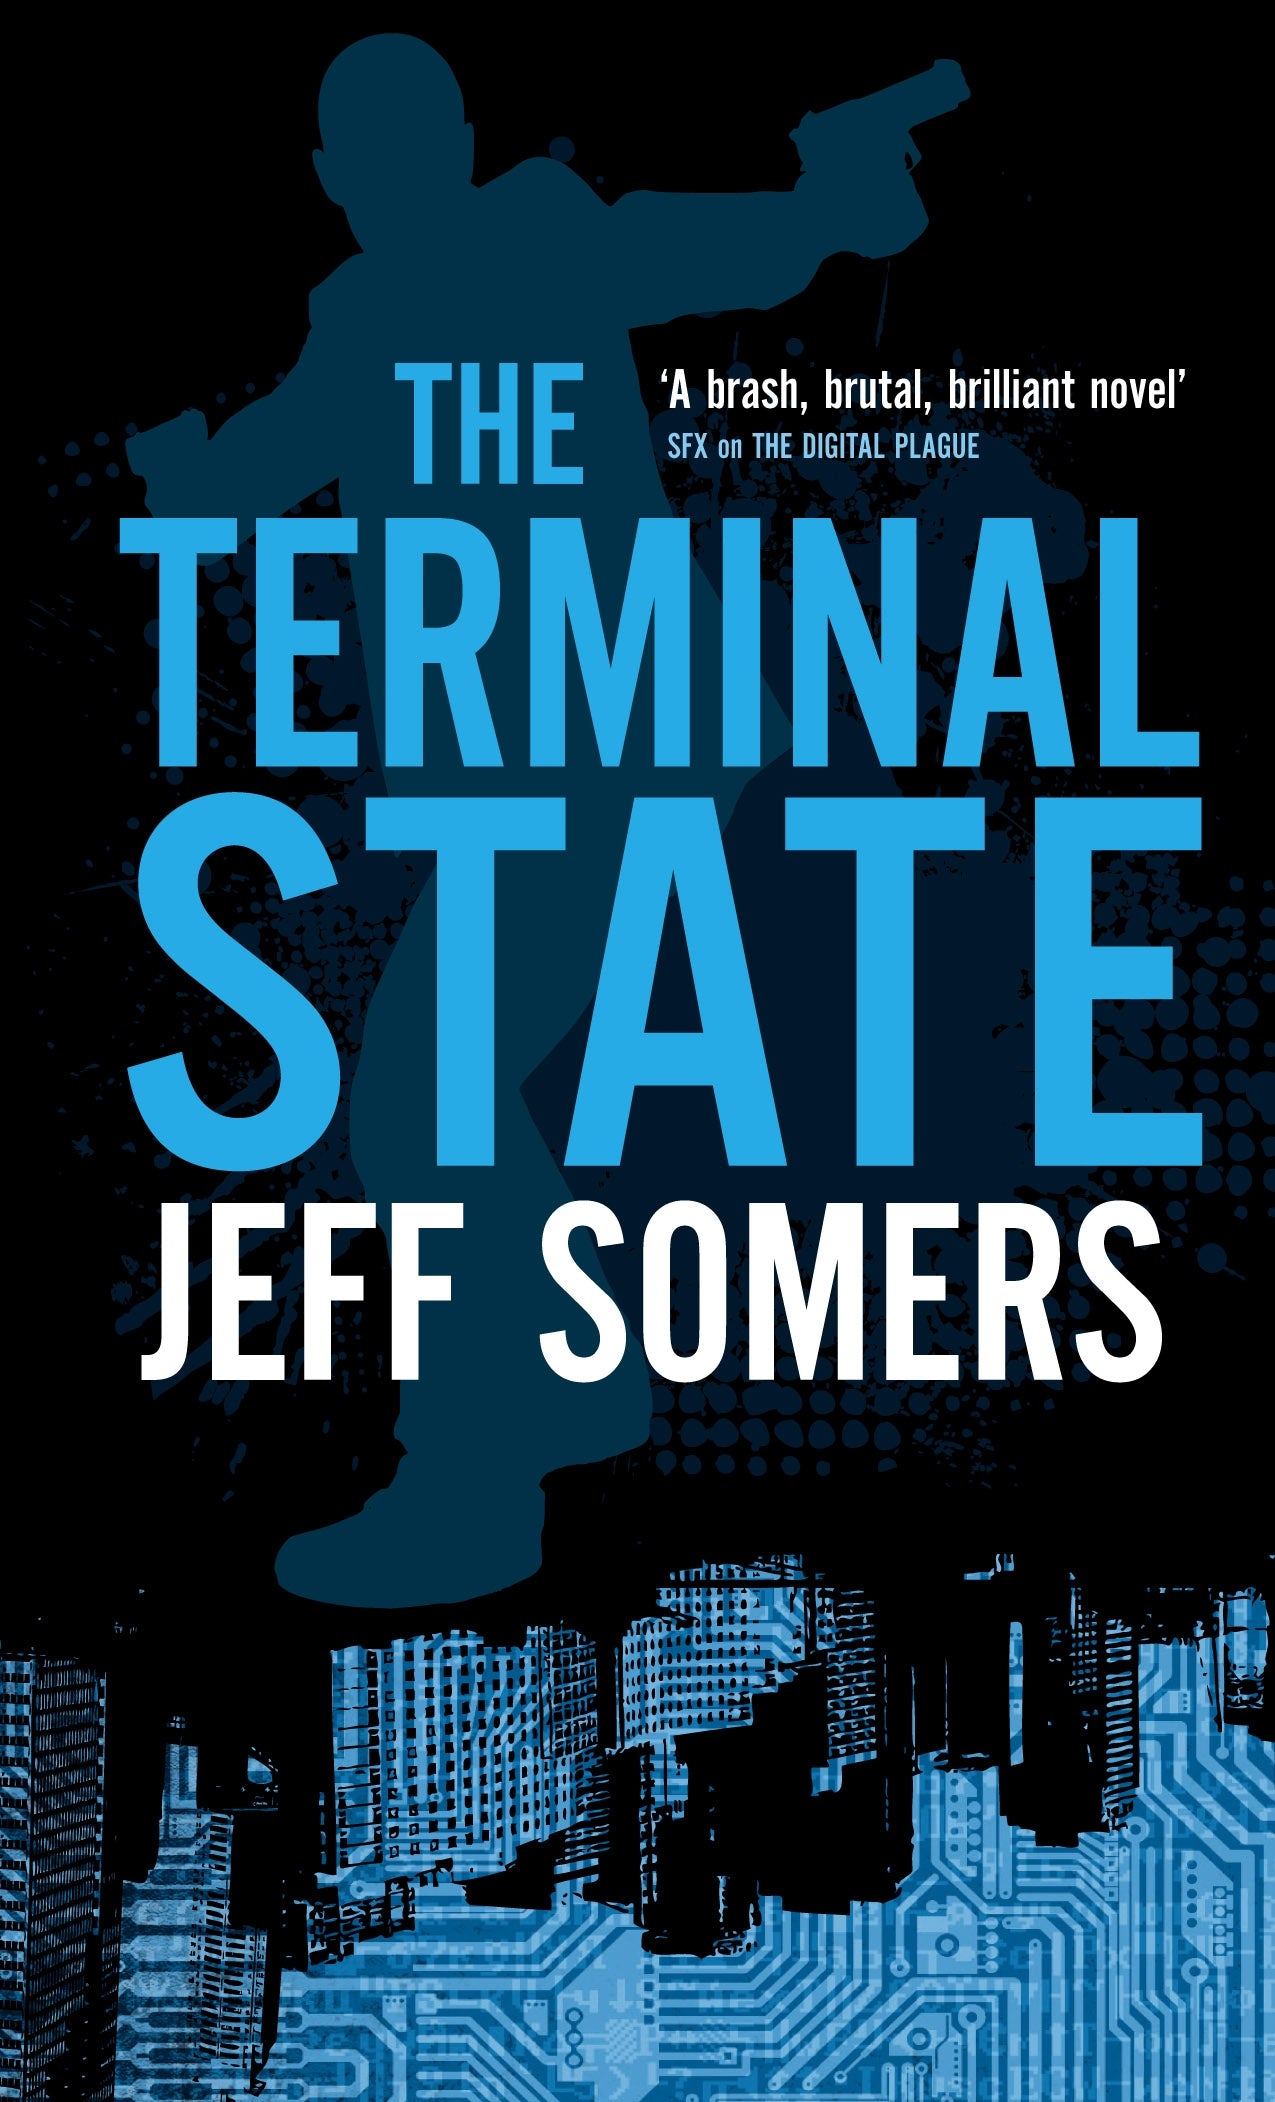 The Terminal State by Jeff Somers